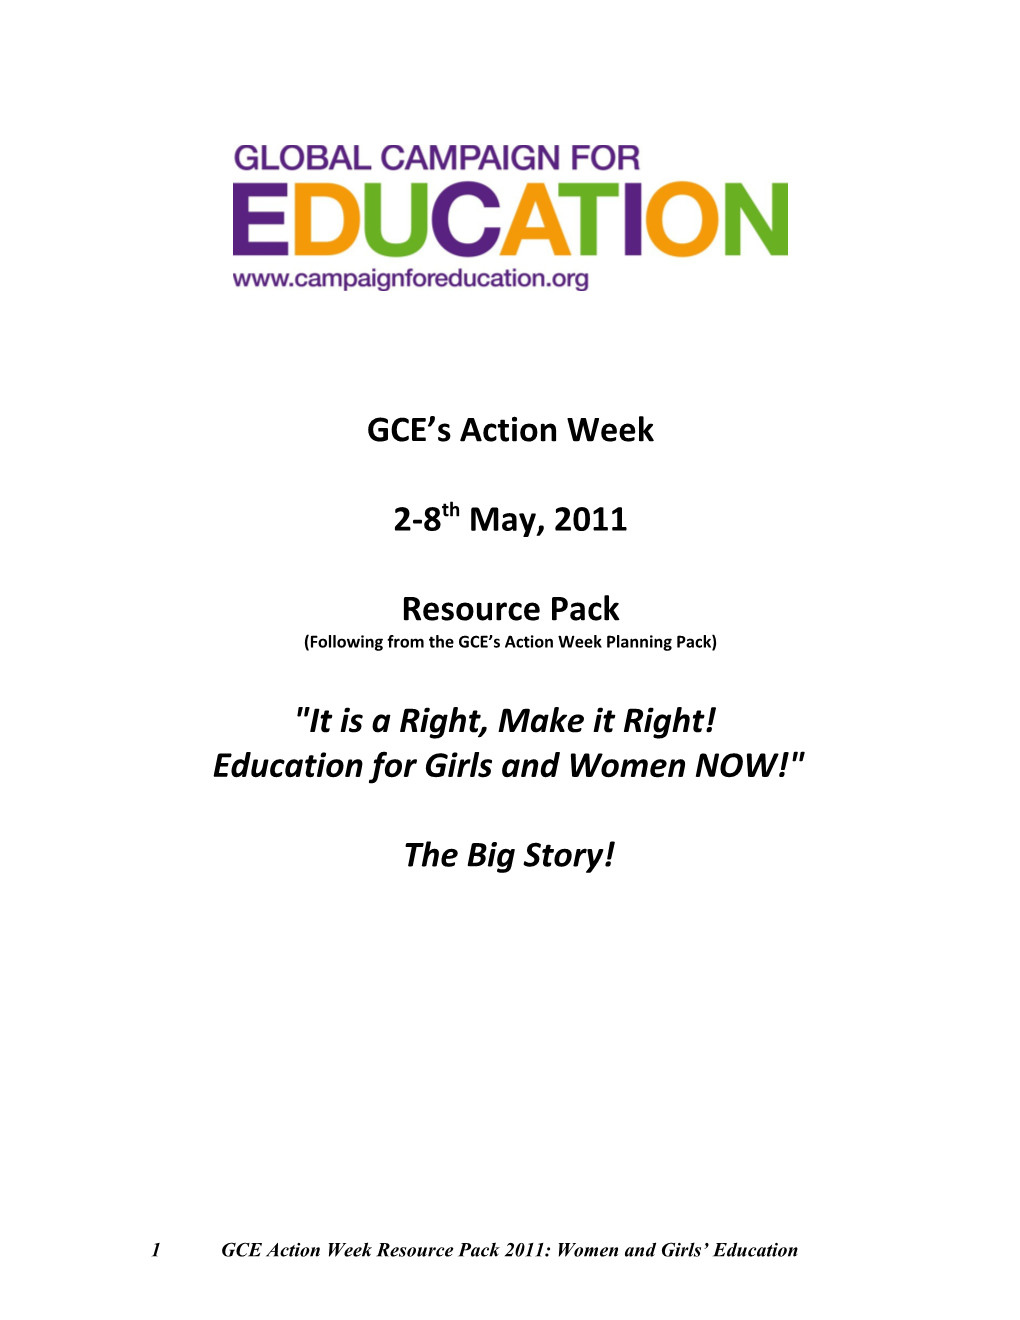 Following from the GCE S Action Week Planning Pack